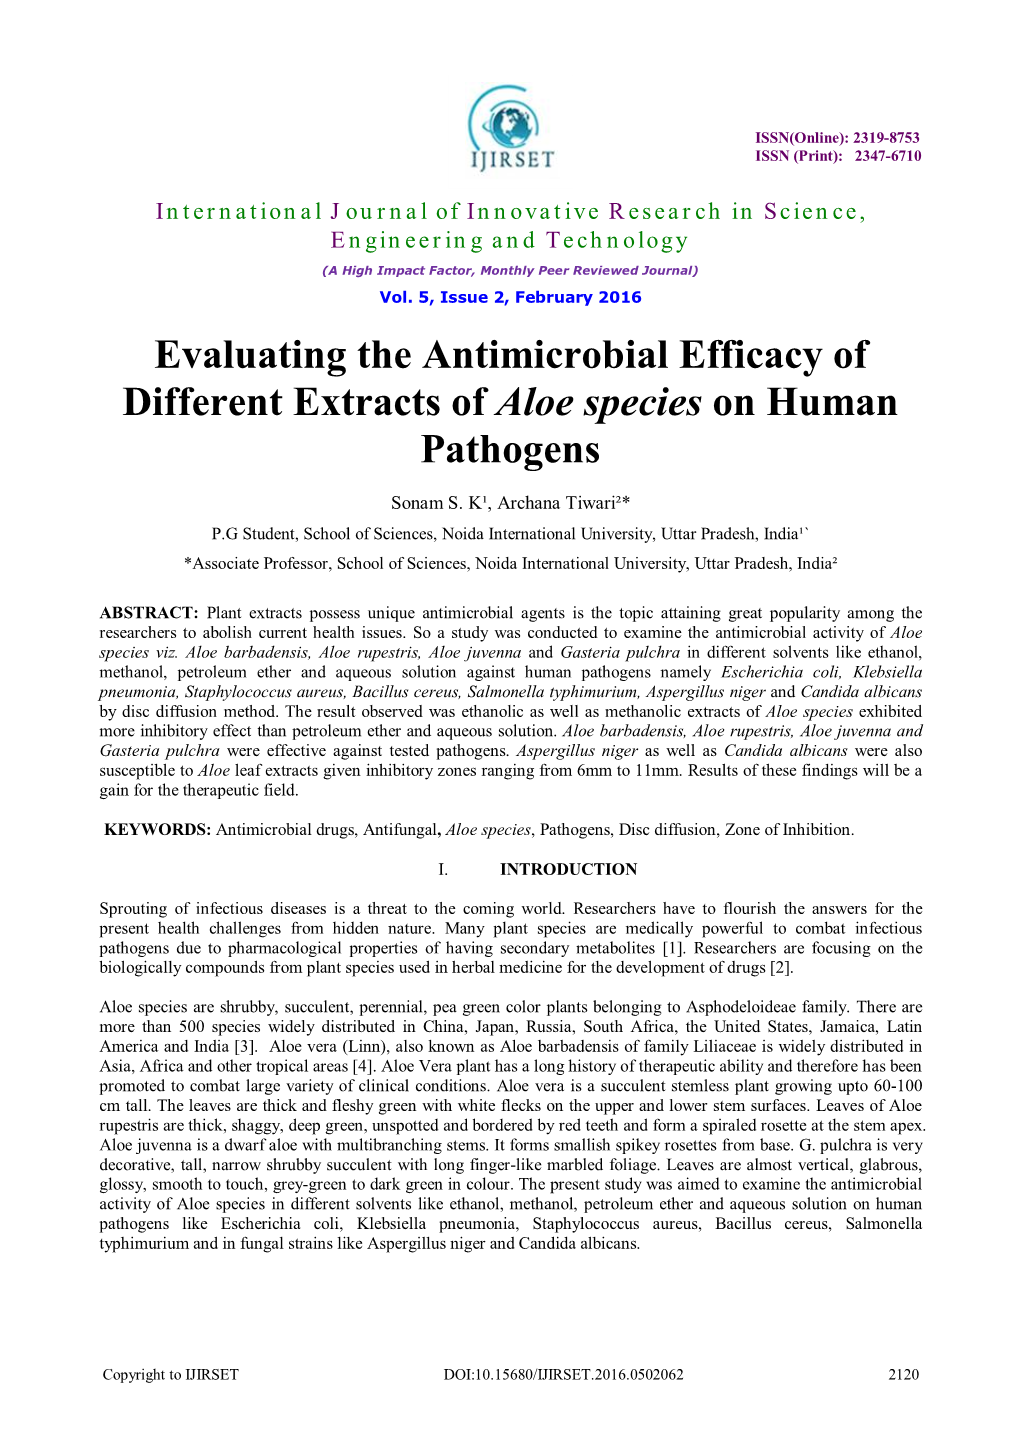 Evaluating the Antimicrobial Efficacy of Different Extracts of Aloe Species on Human Pathogens